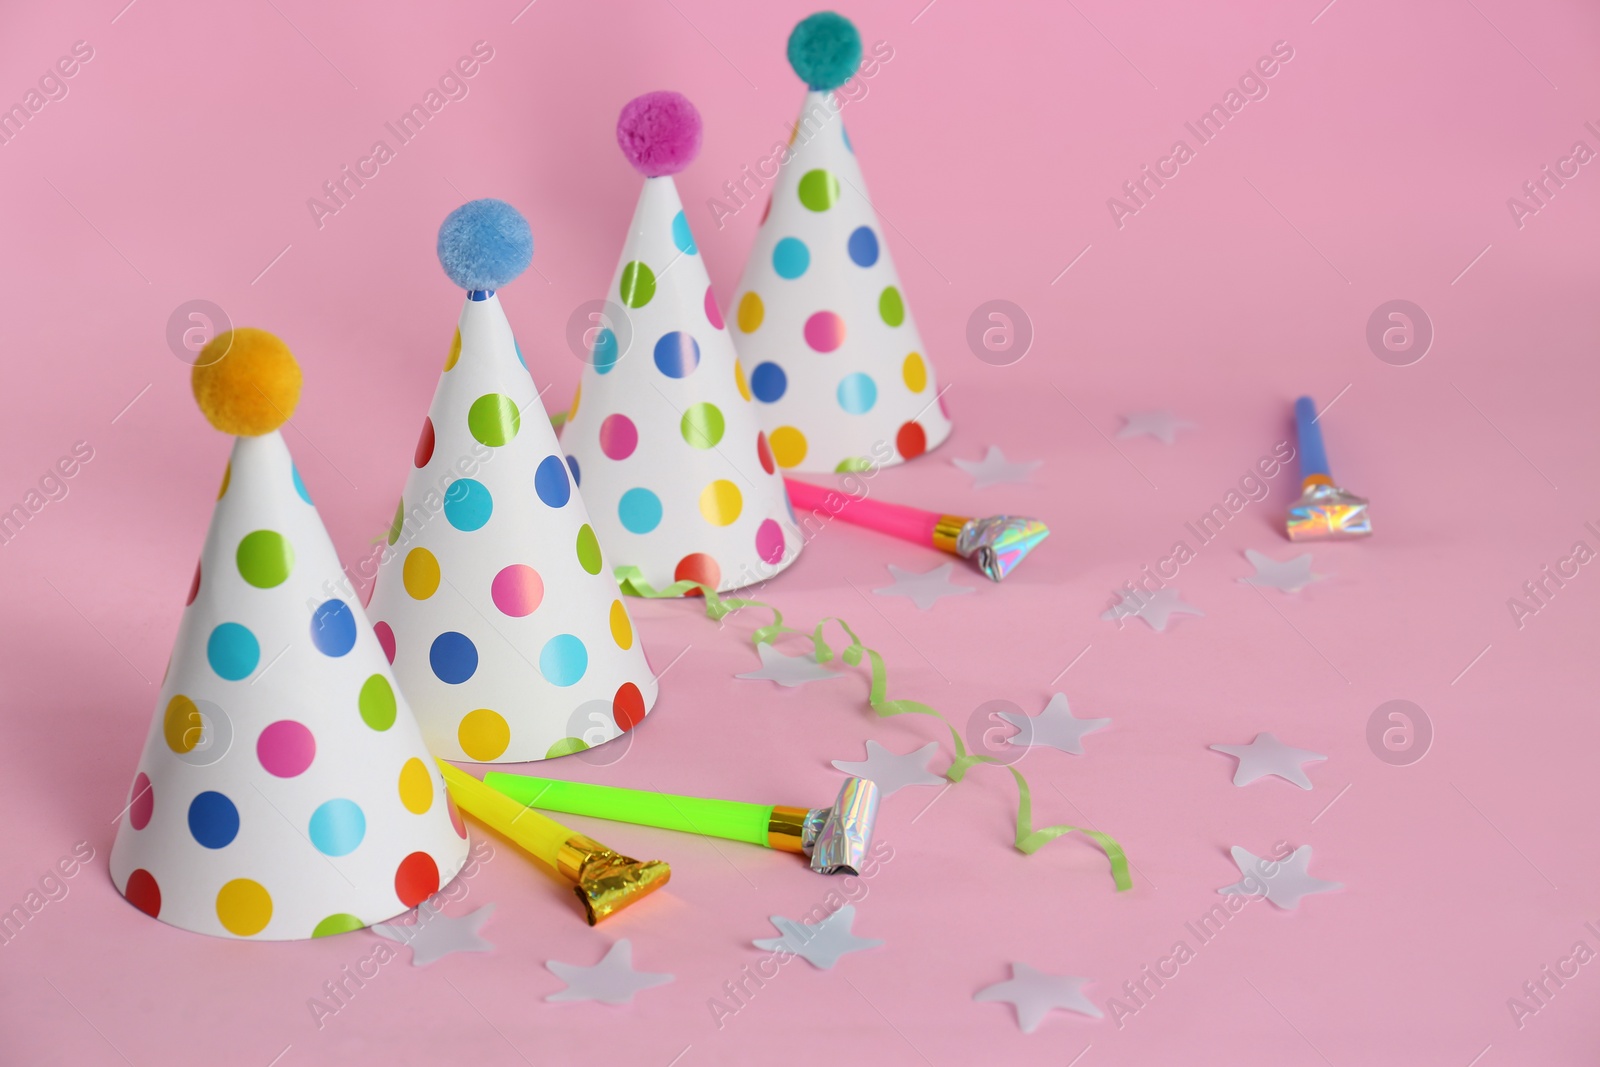 Photo of Colorful party hats with fluffy balls and blowers on pink background